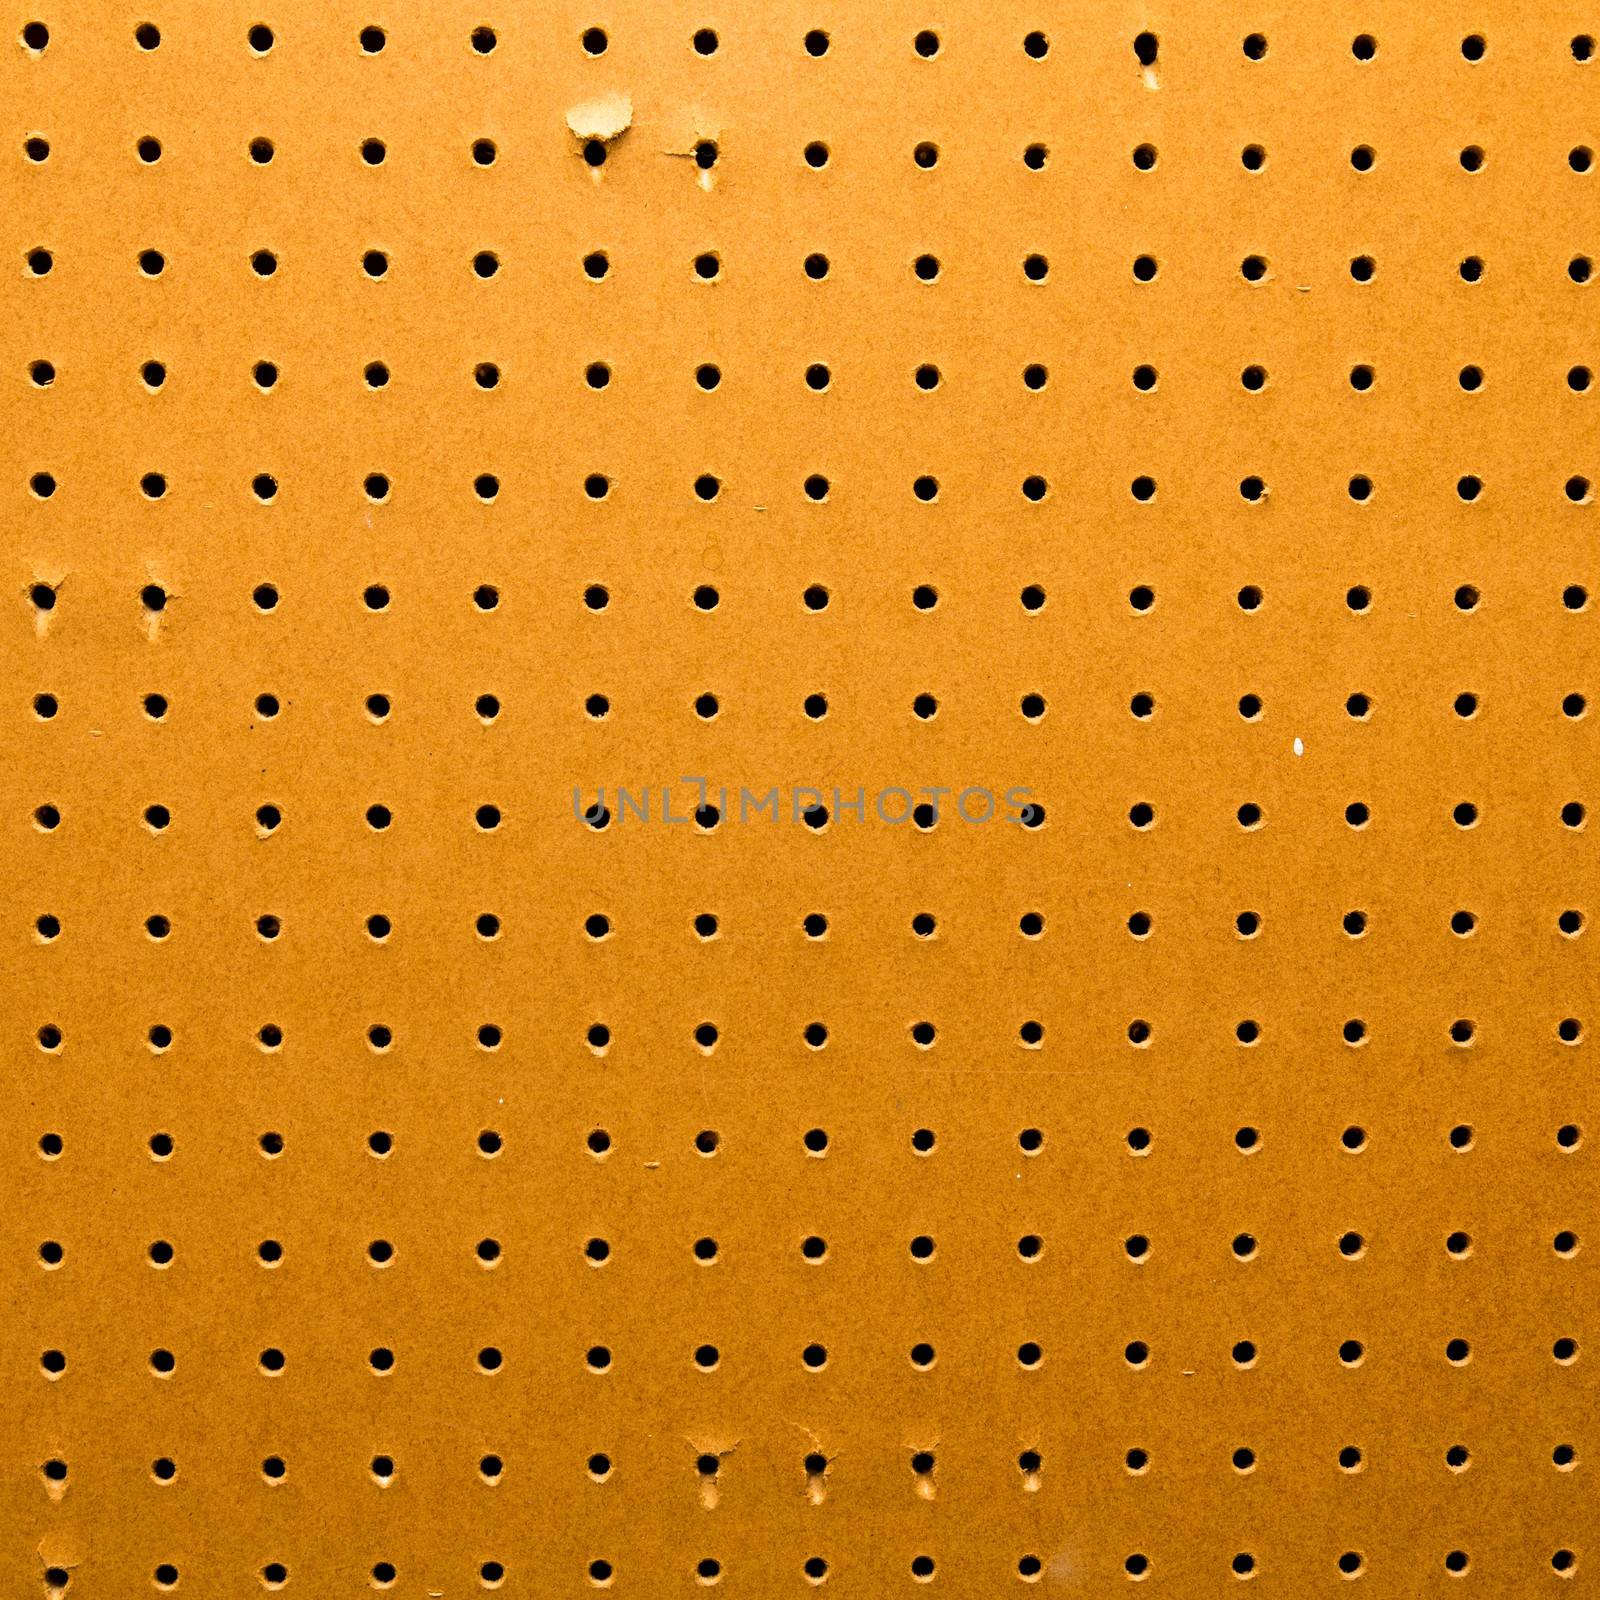 Peg board texture closeup by stockyimages